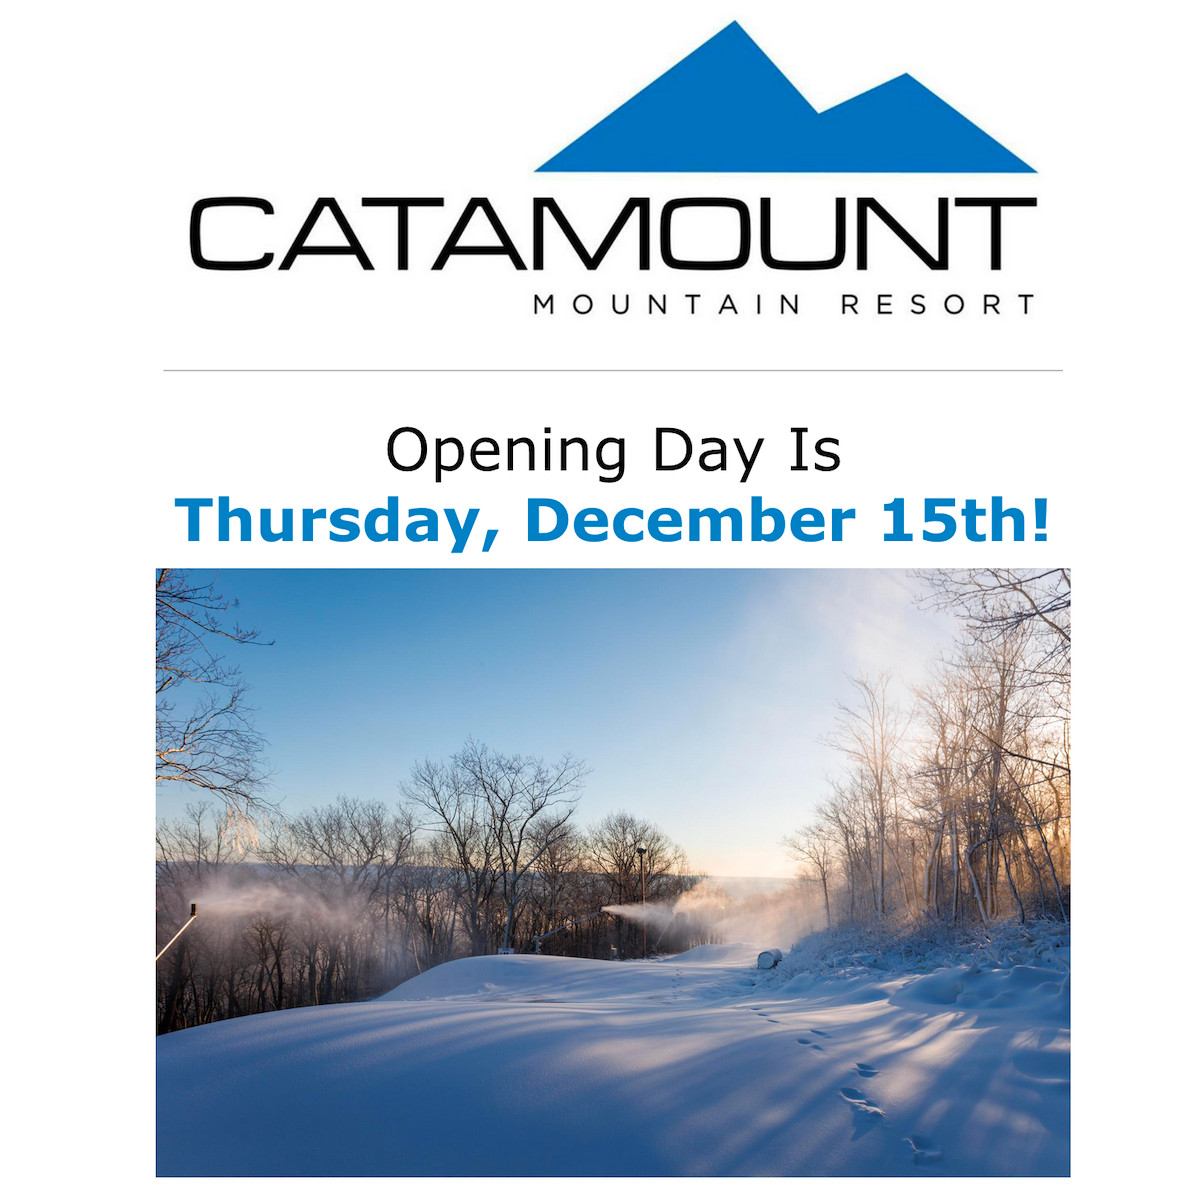 Catamount Logo, title and picture of snowmaking